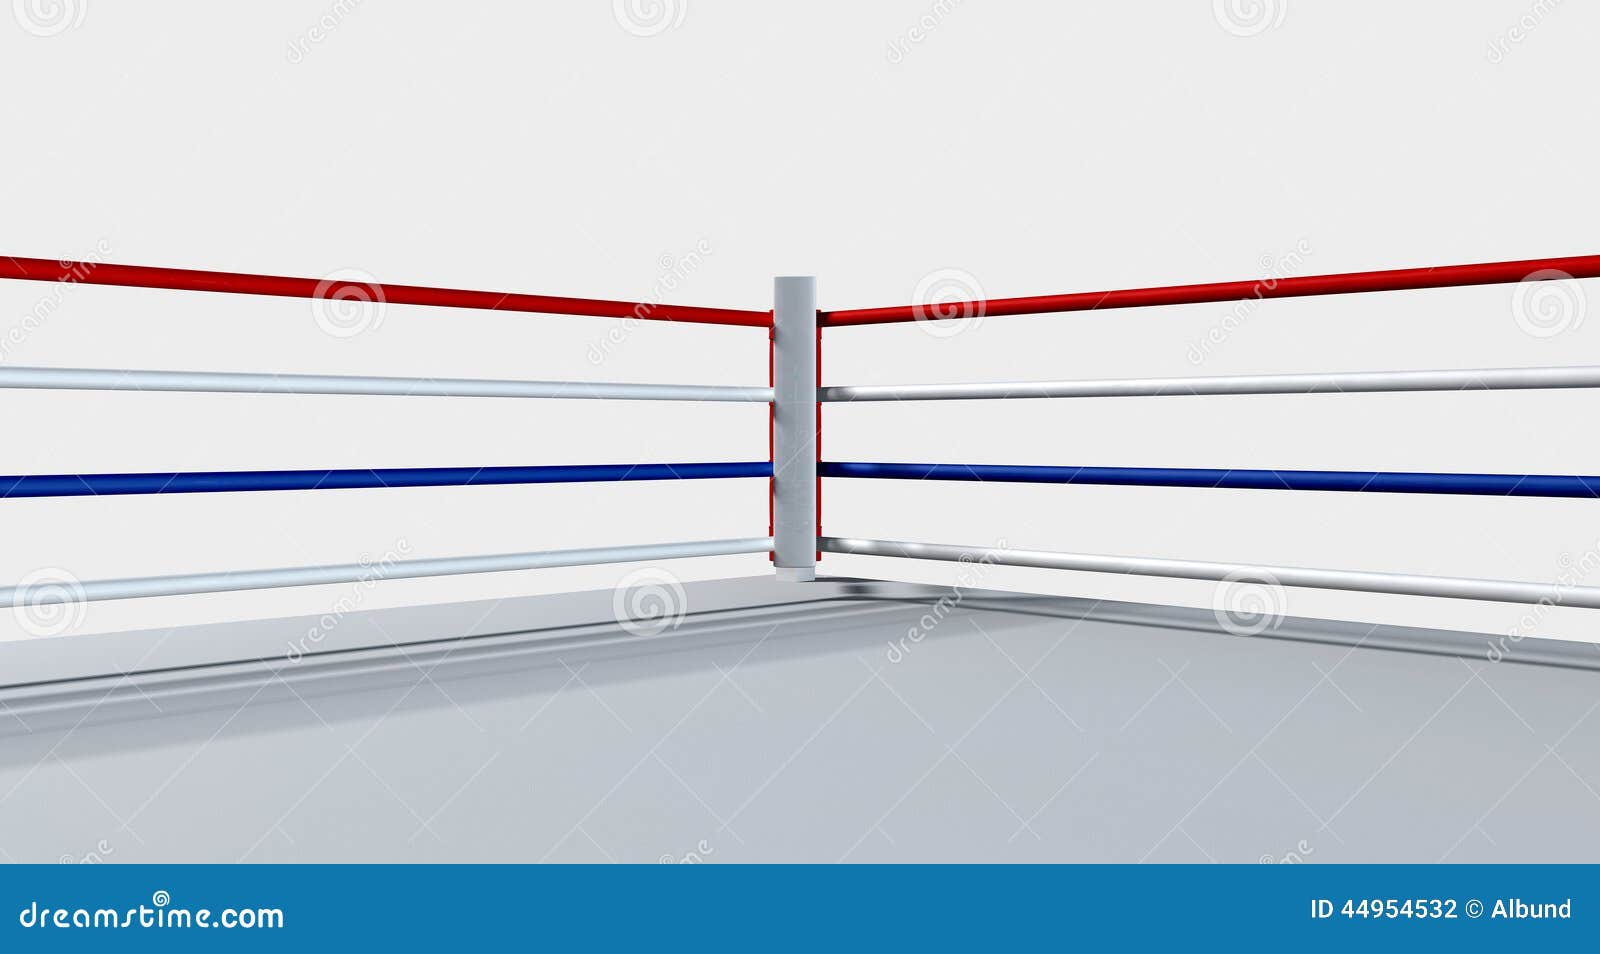 clipart boxing ring - photo #31